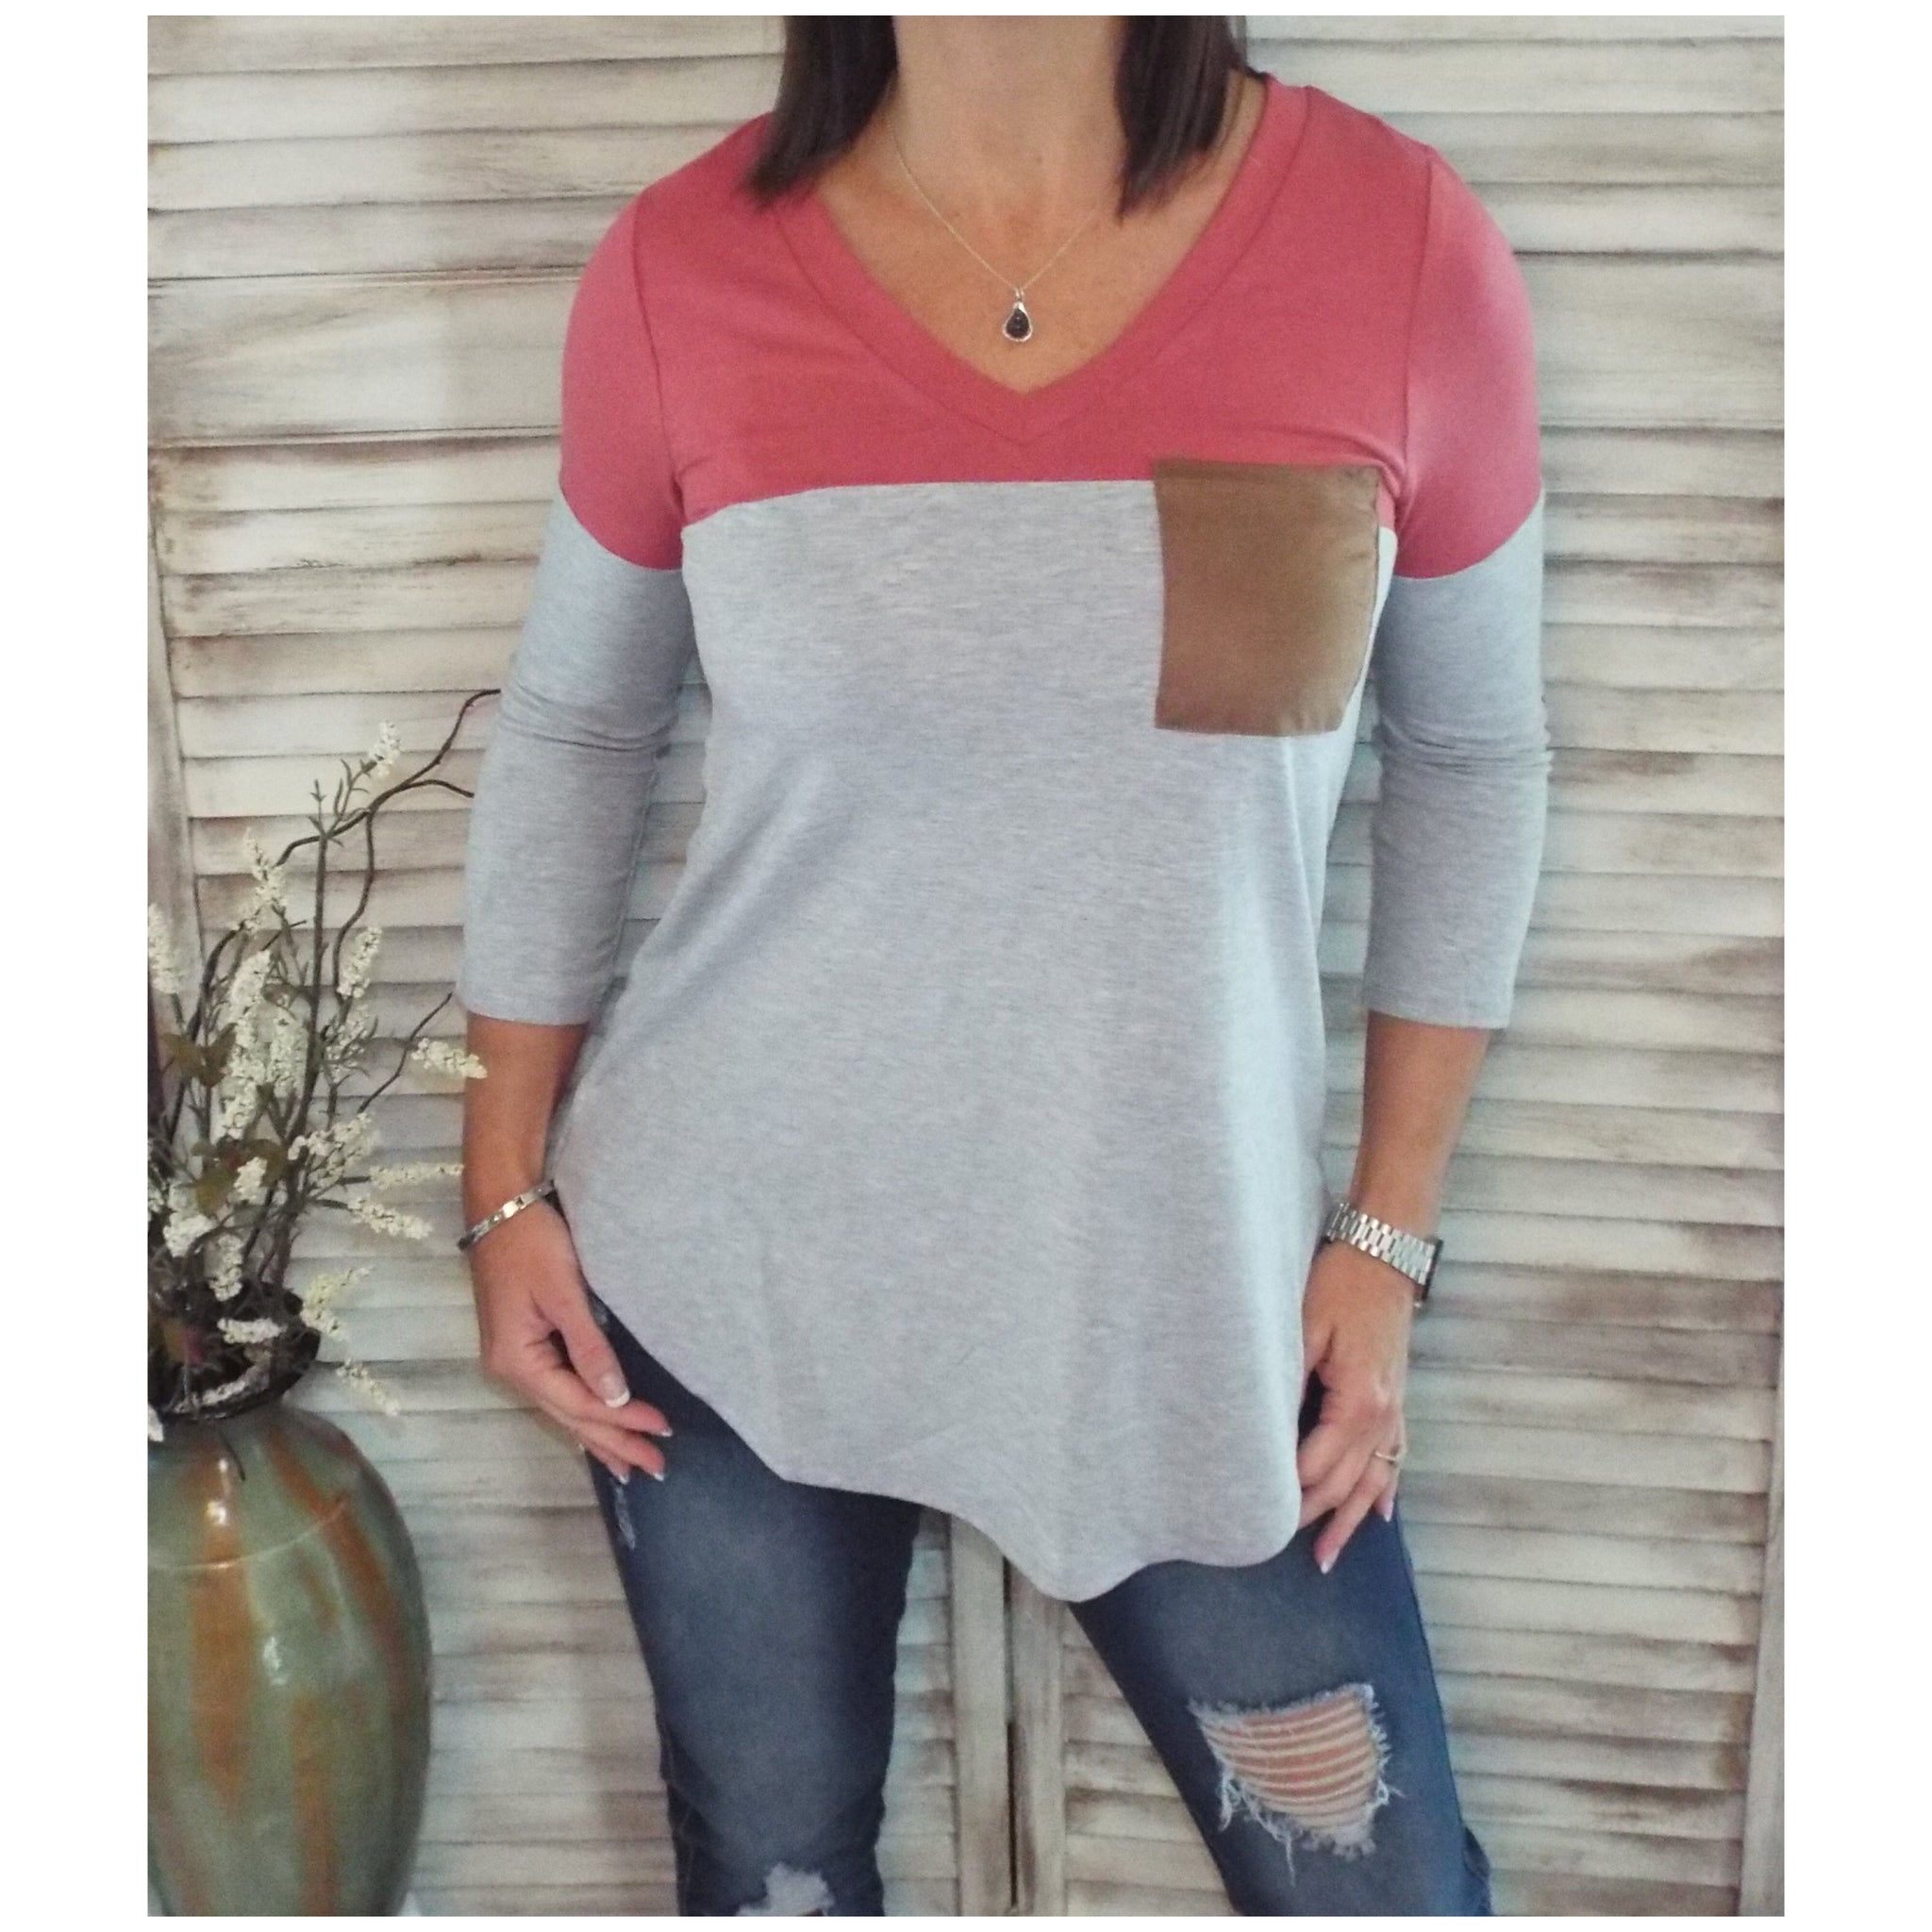 Suede Pocket Elbow Detail V-Neck Floaty Tunic 3/4 Sleeve Pink Gray S/M/L/XL